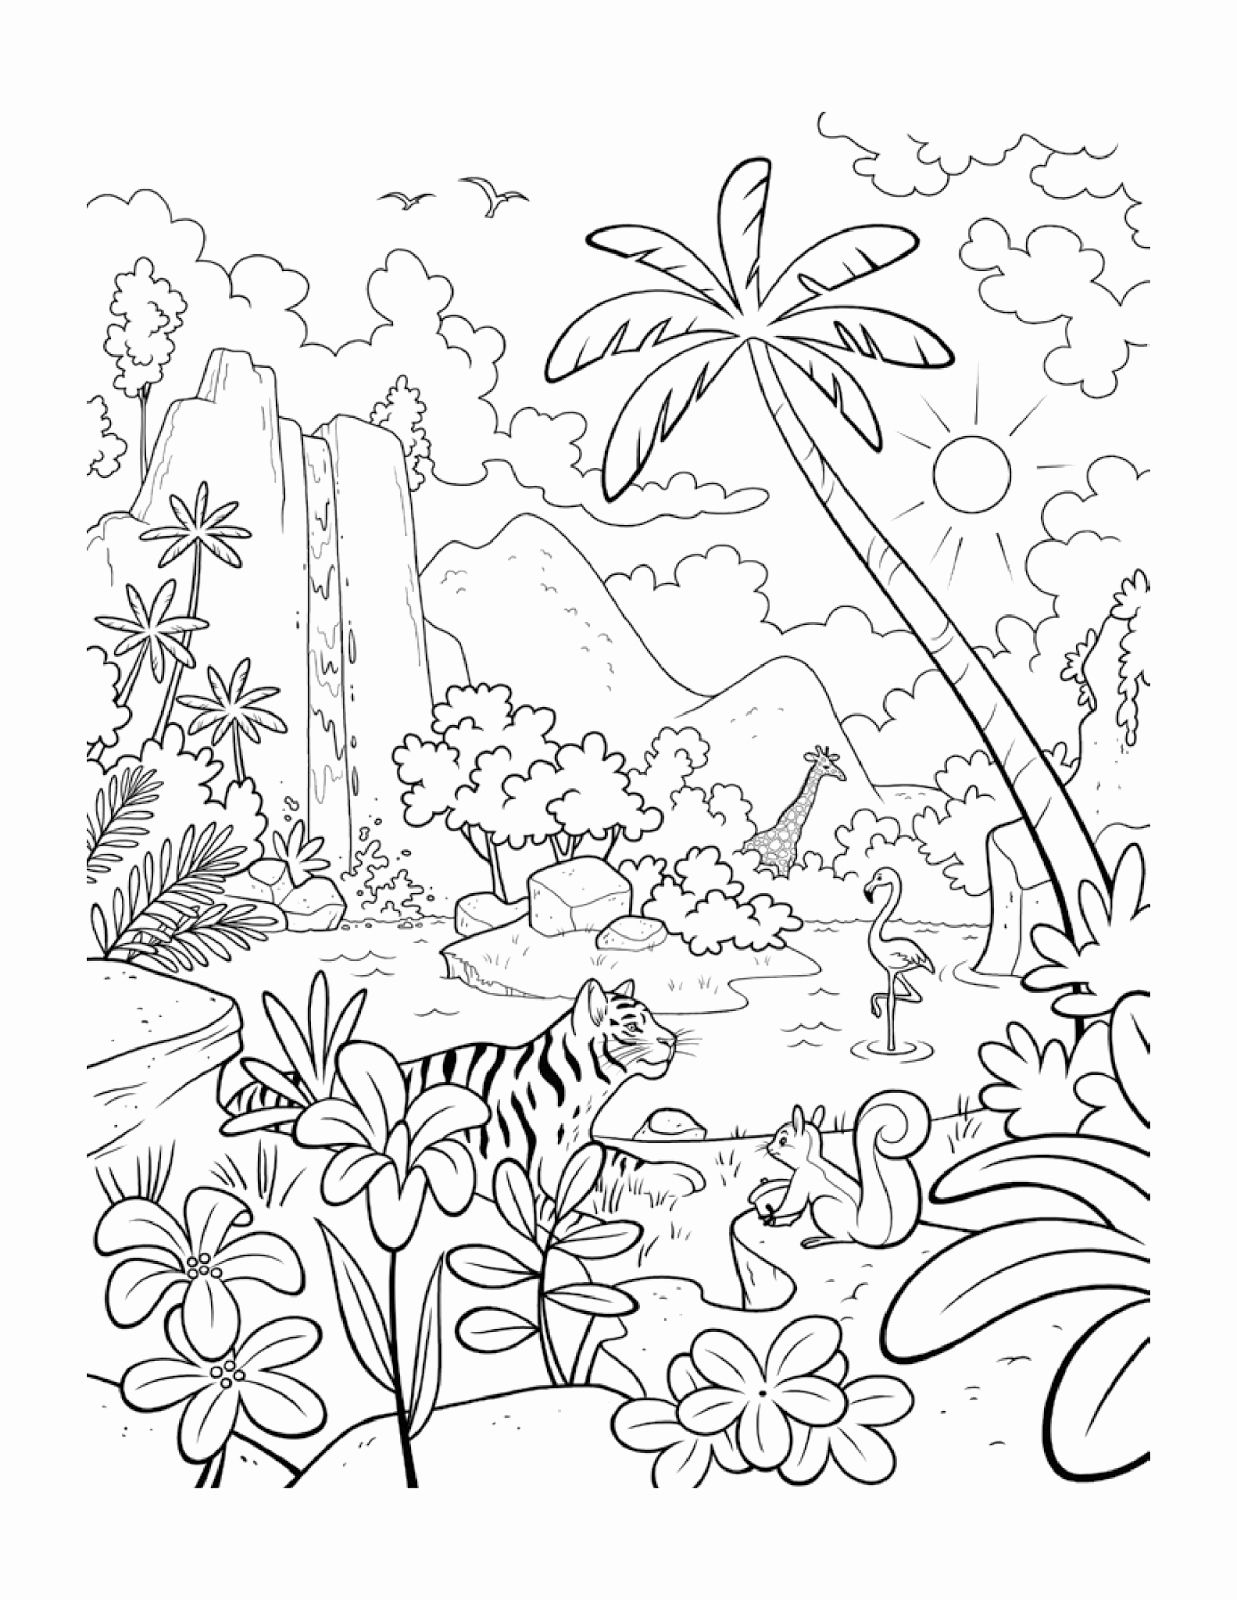 rainforest coloring pages to print